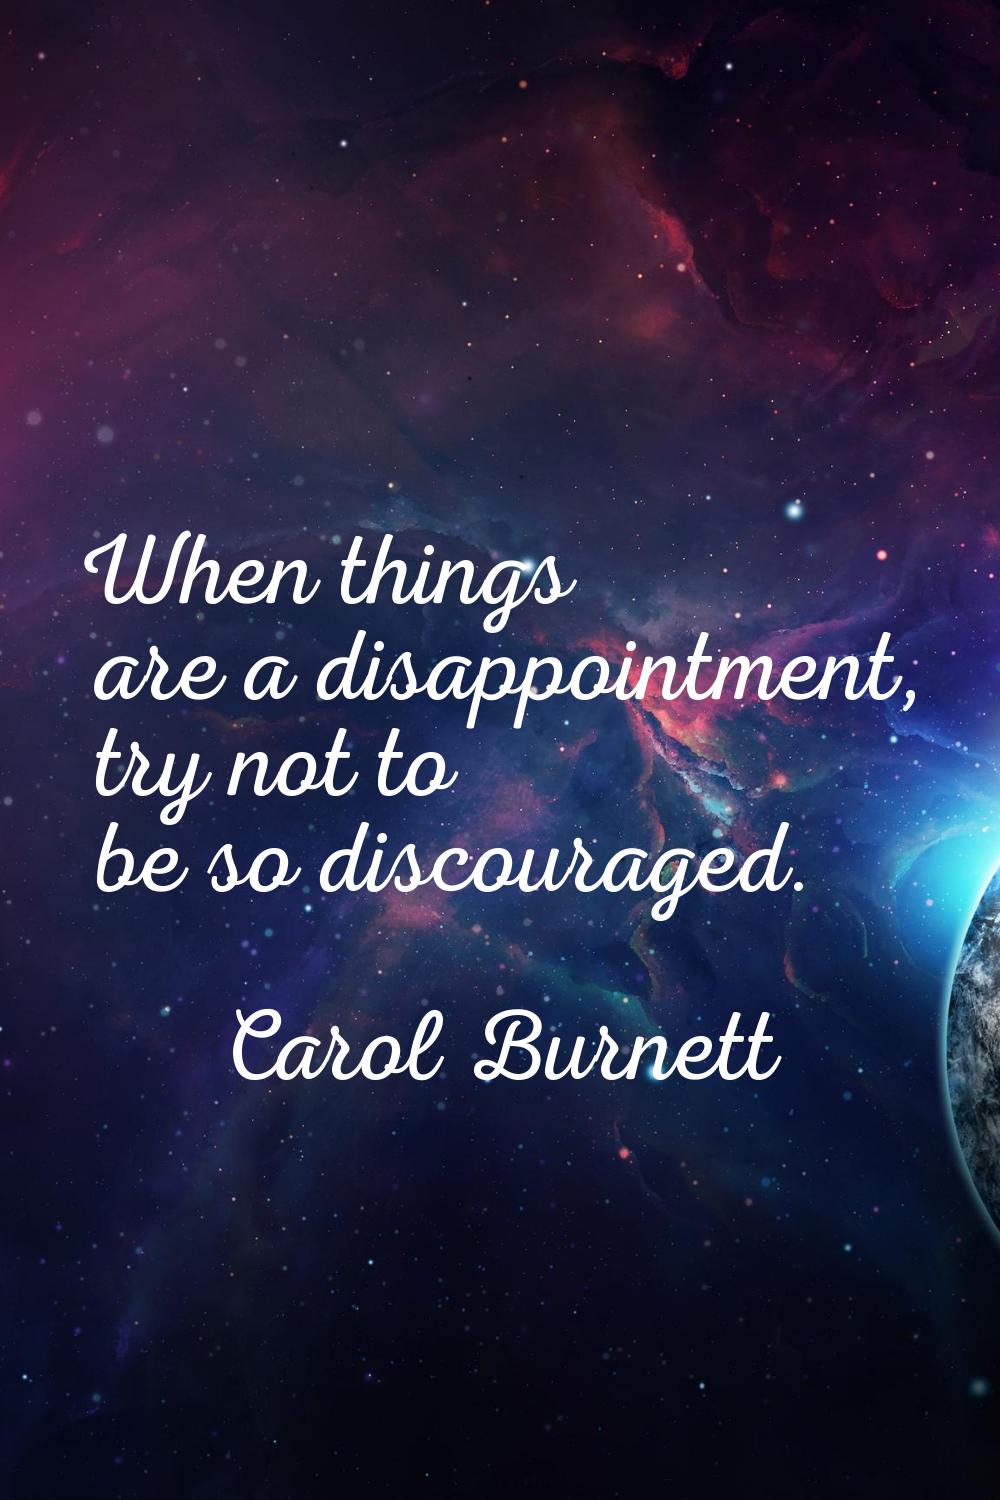 When things are a disappointment, try not to be so discouraged.